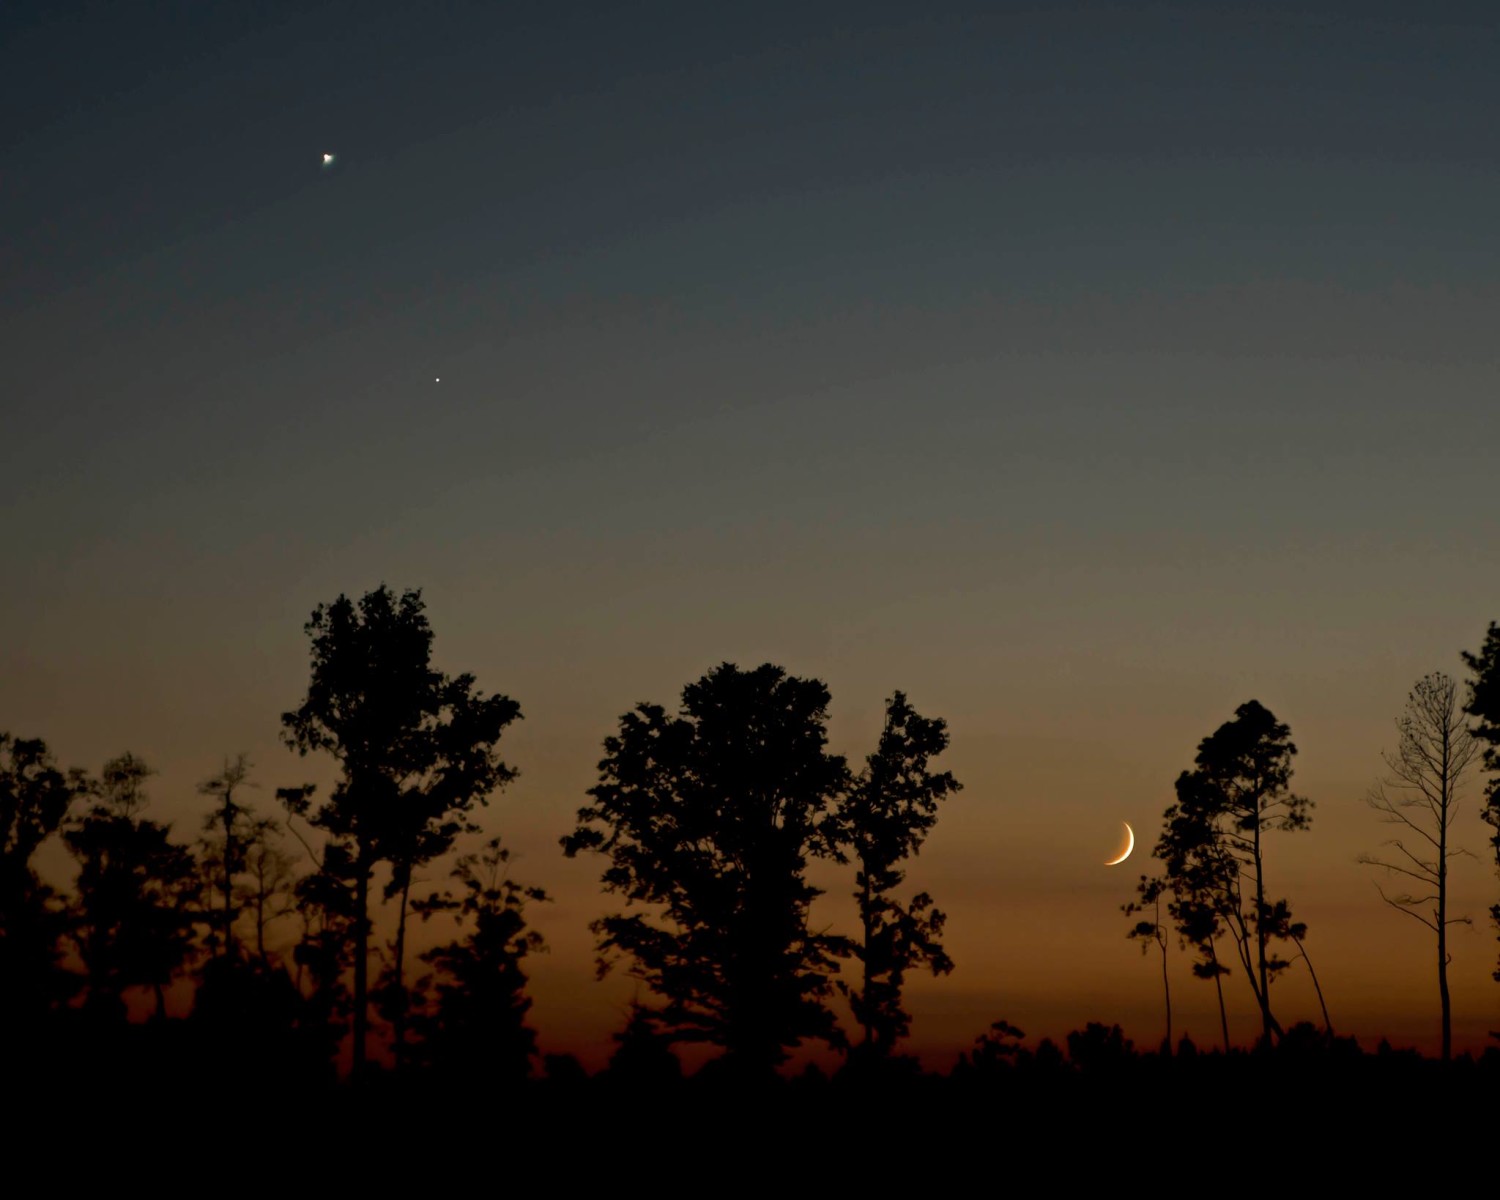 View larger. | Here are the moon and Venus last night - September 7 - as captured by EarthSky Facebook friend Ken Christison in North Carolina.  Thank you, Ken!  On Sunday evening - September 8 - the moon will appear much closer to Venus.  The Americas, in particular, will get a dramatically close view of the pair.